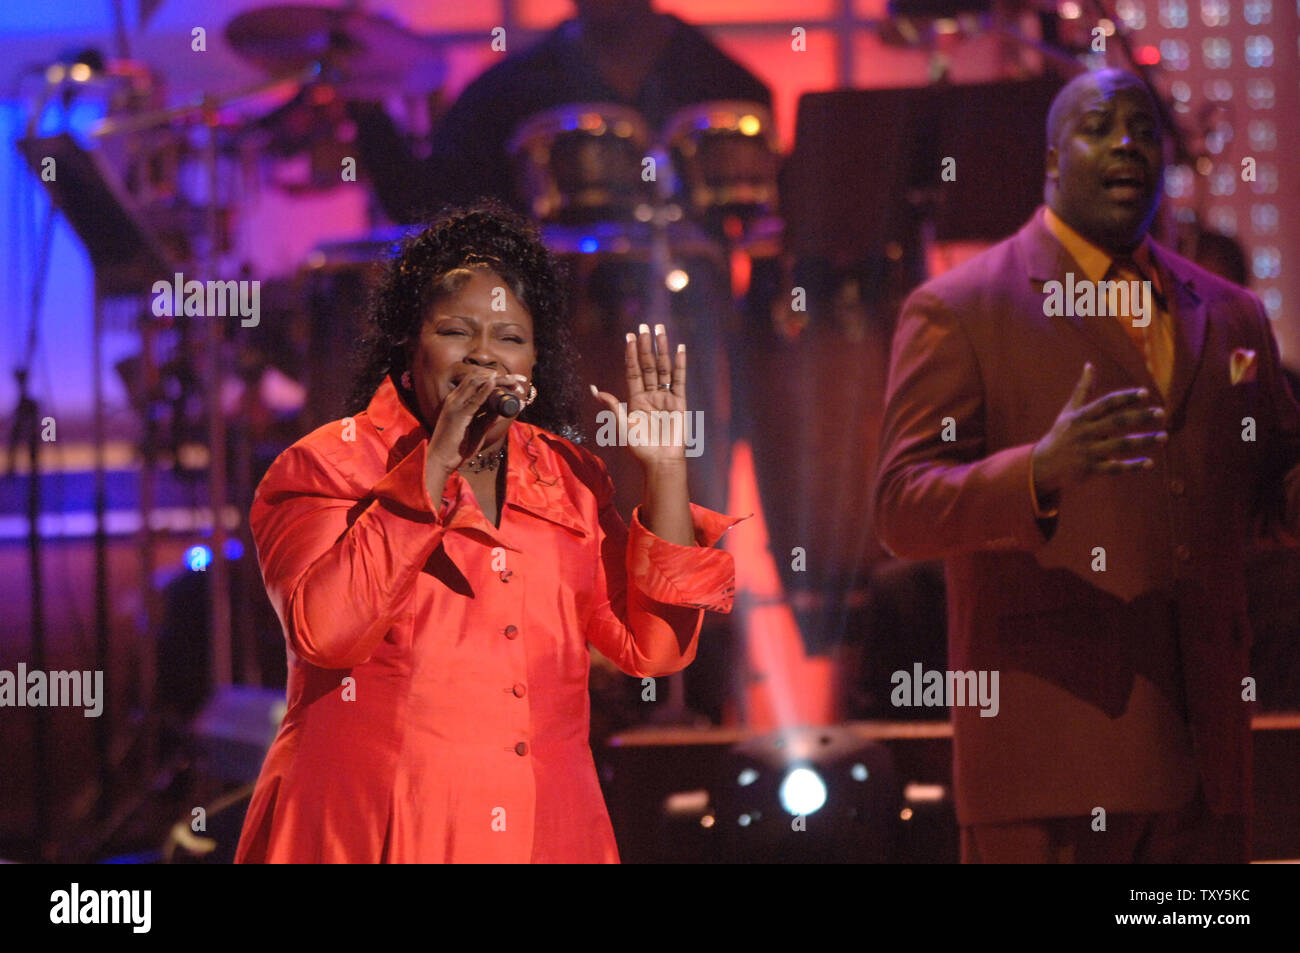 The Shekinah Glory Ministry featuring Juanita Bynum performs 'Yes' during the taping of BET's Celebration of Gospel VI at the Wilshire Ebell Theatre in Los Angeles, California on January 28, 2006. The show will  be telecast on February 23 on BET.(UPI Photo/ Phil McCarten) Stock Photo